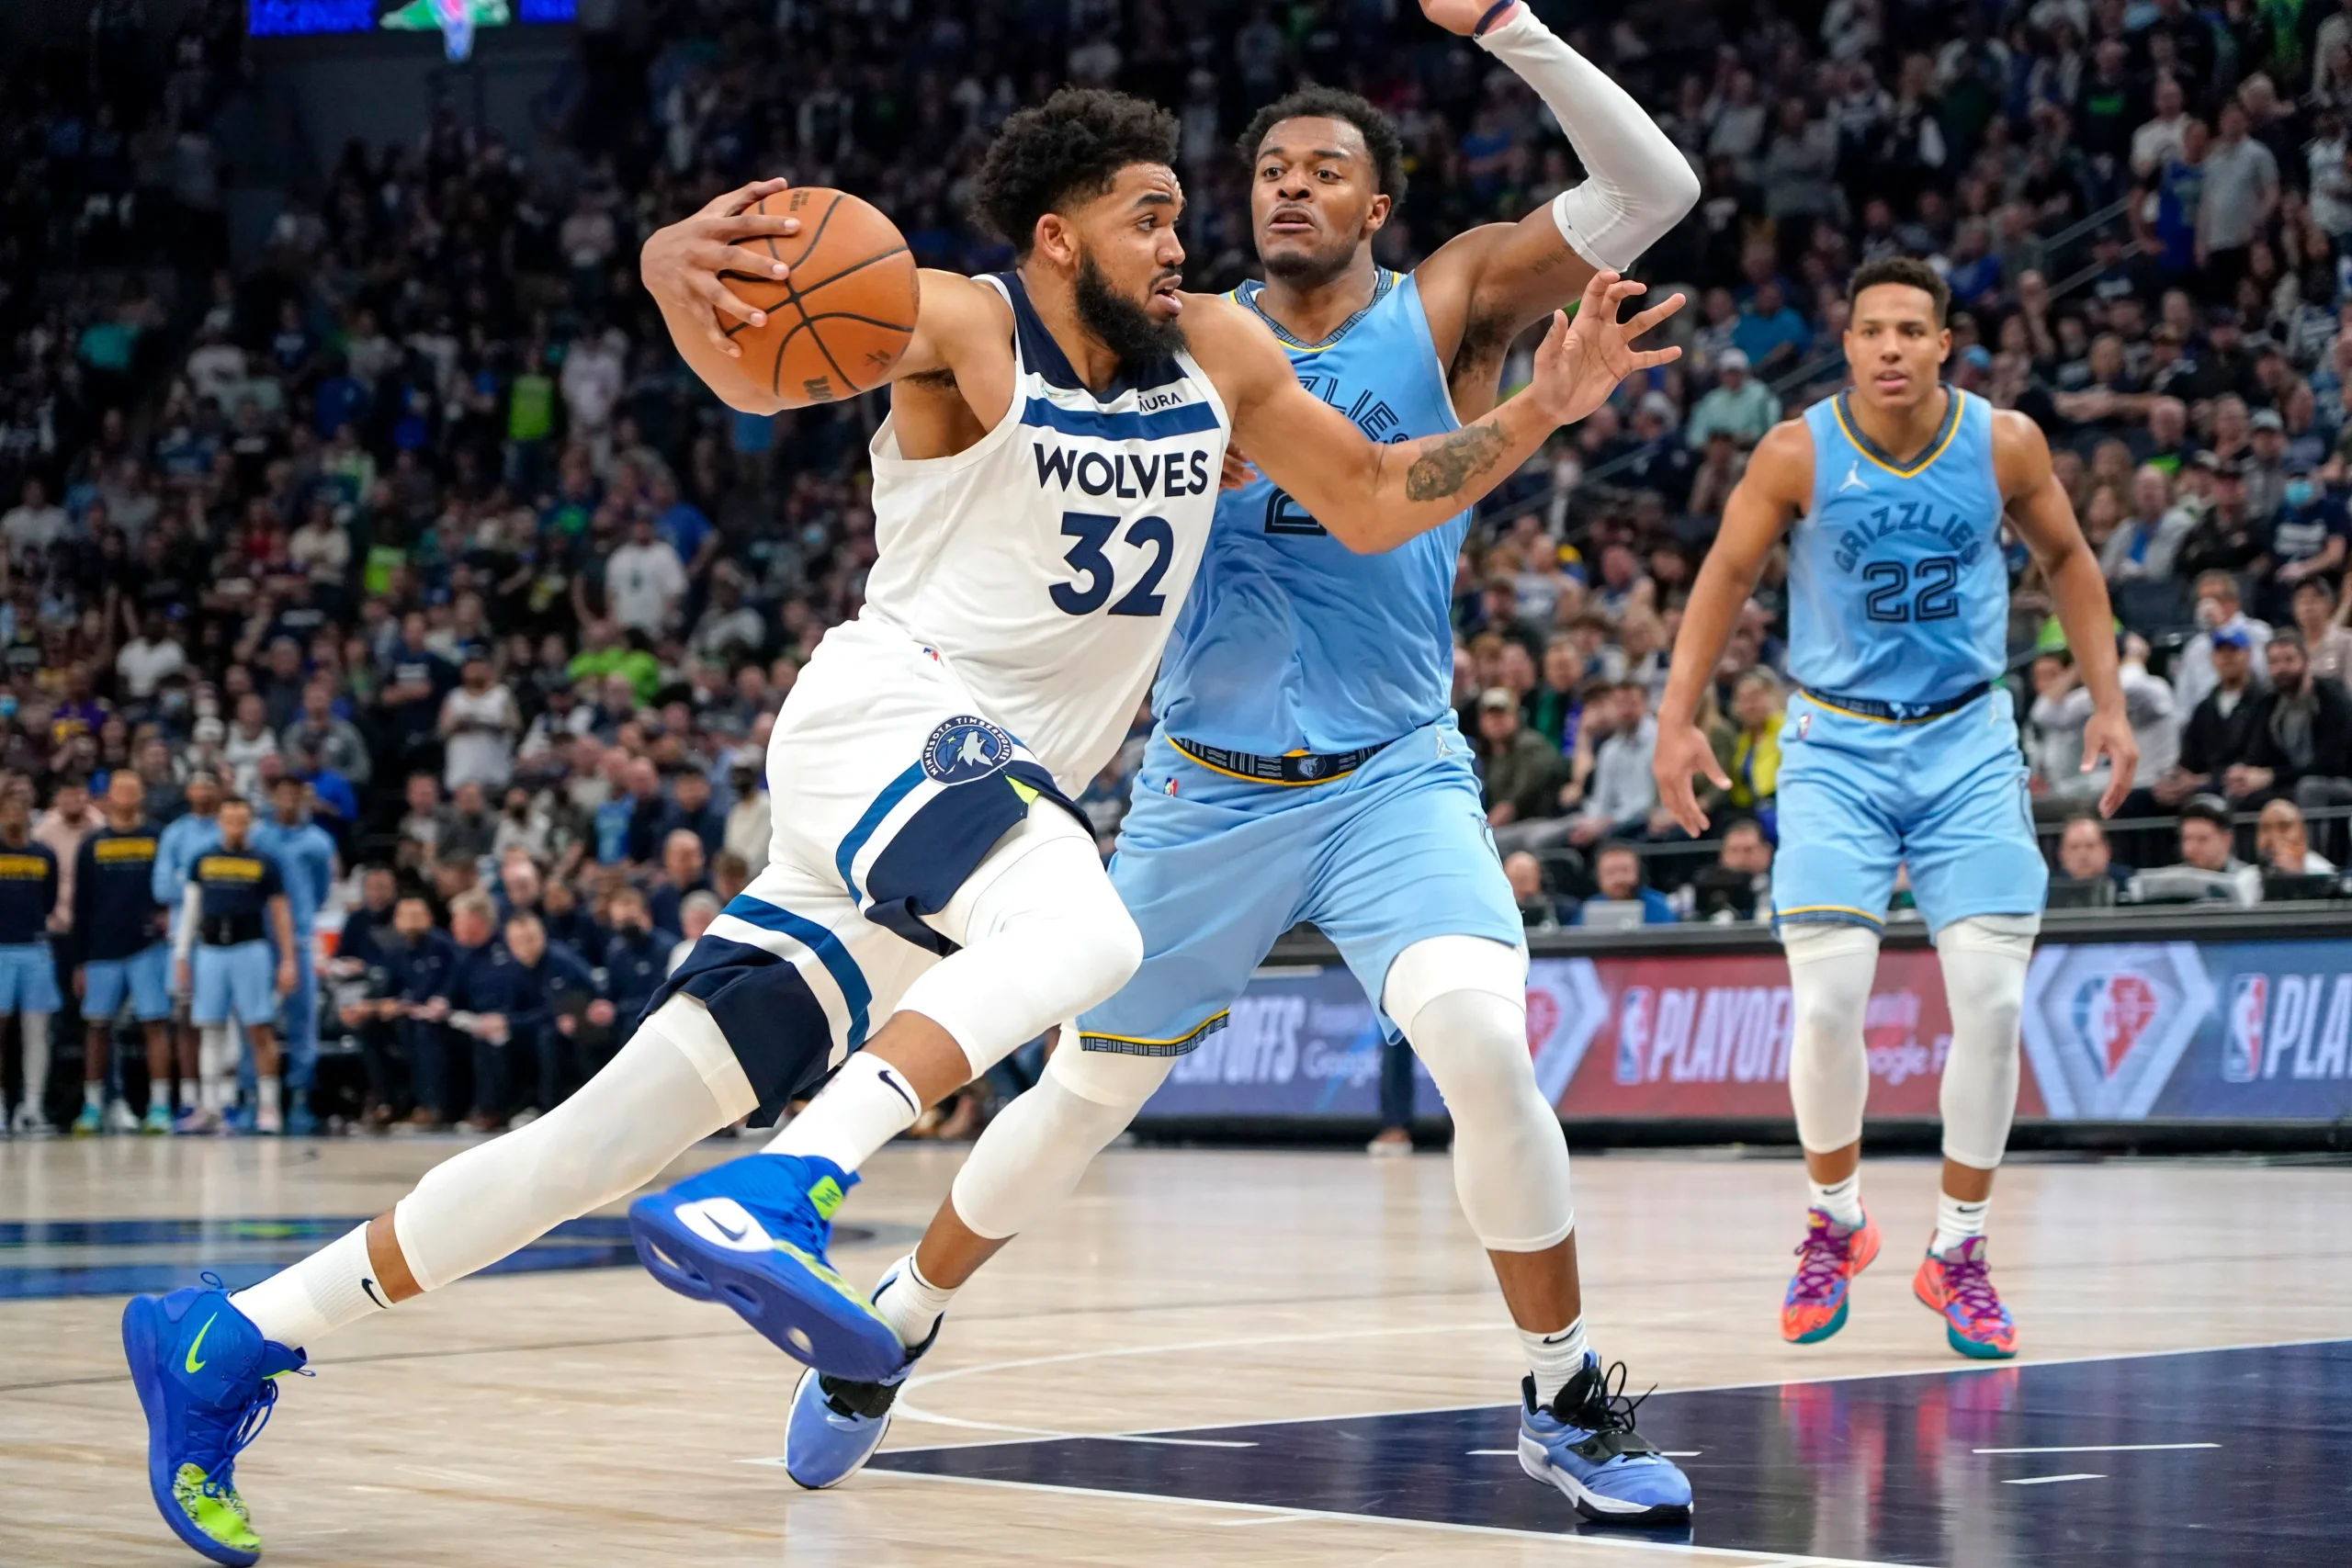 Warriors to Acquire Karl-Anthony Towns from the Minnesota Timberwolves in a Blockbuster Trade Proposal